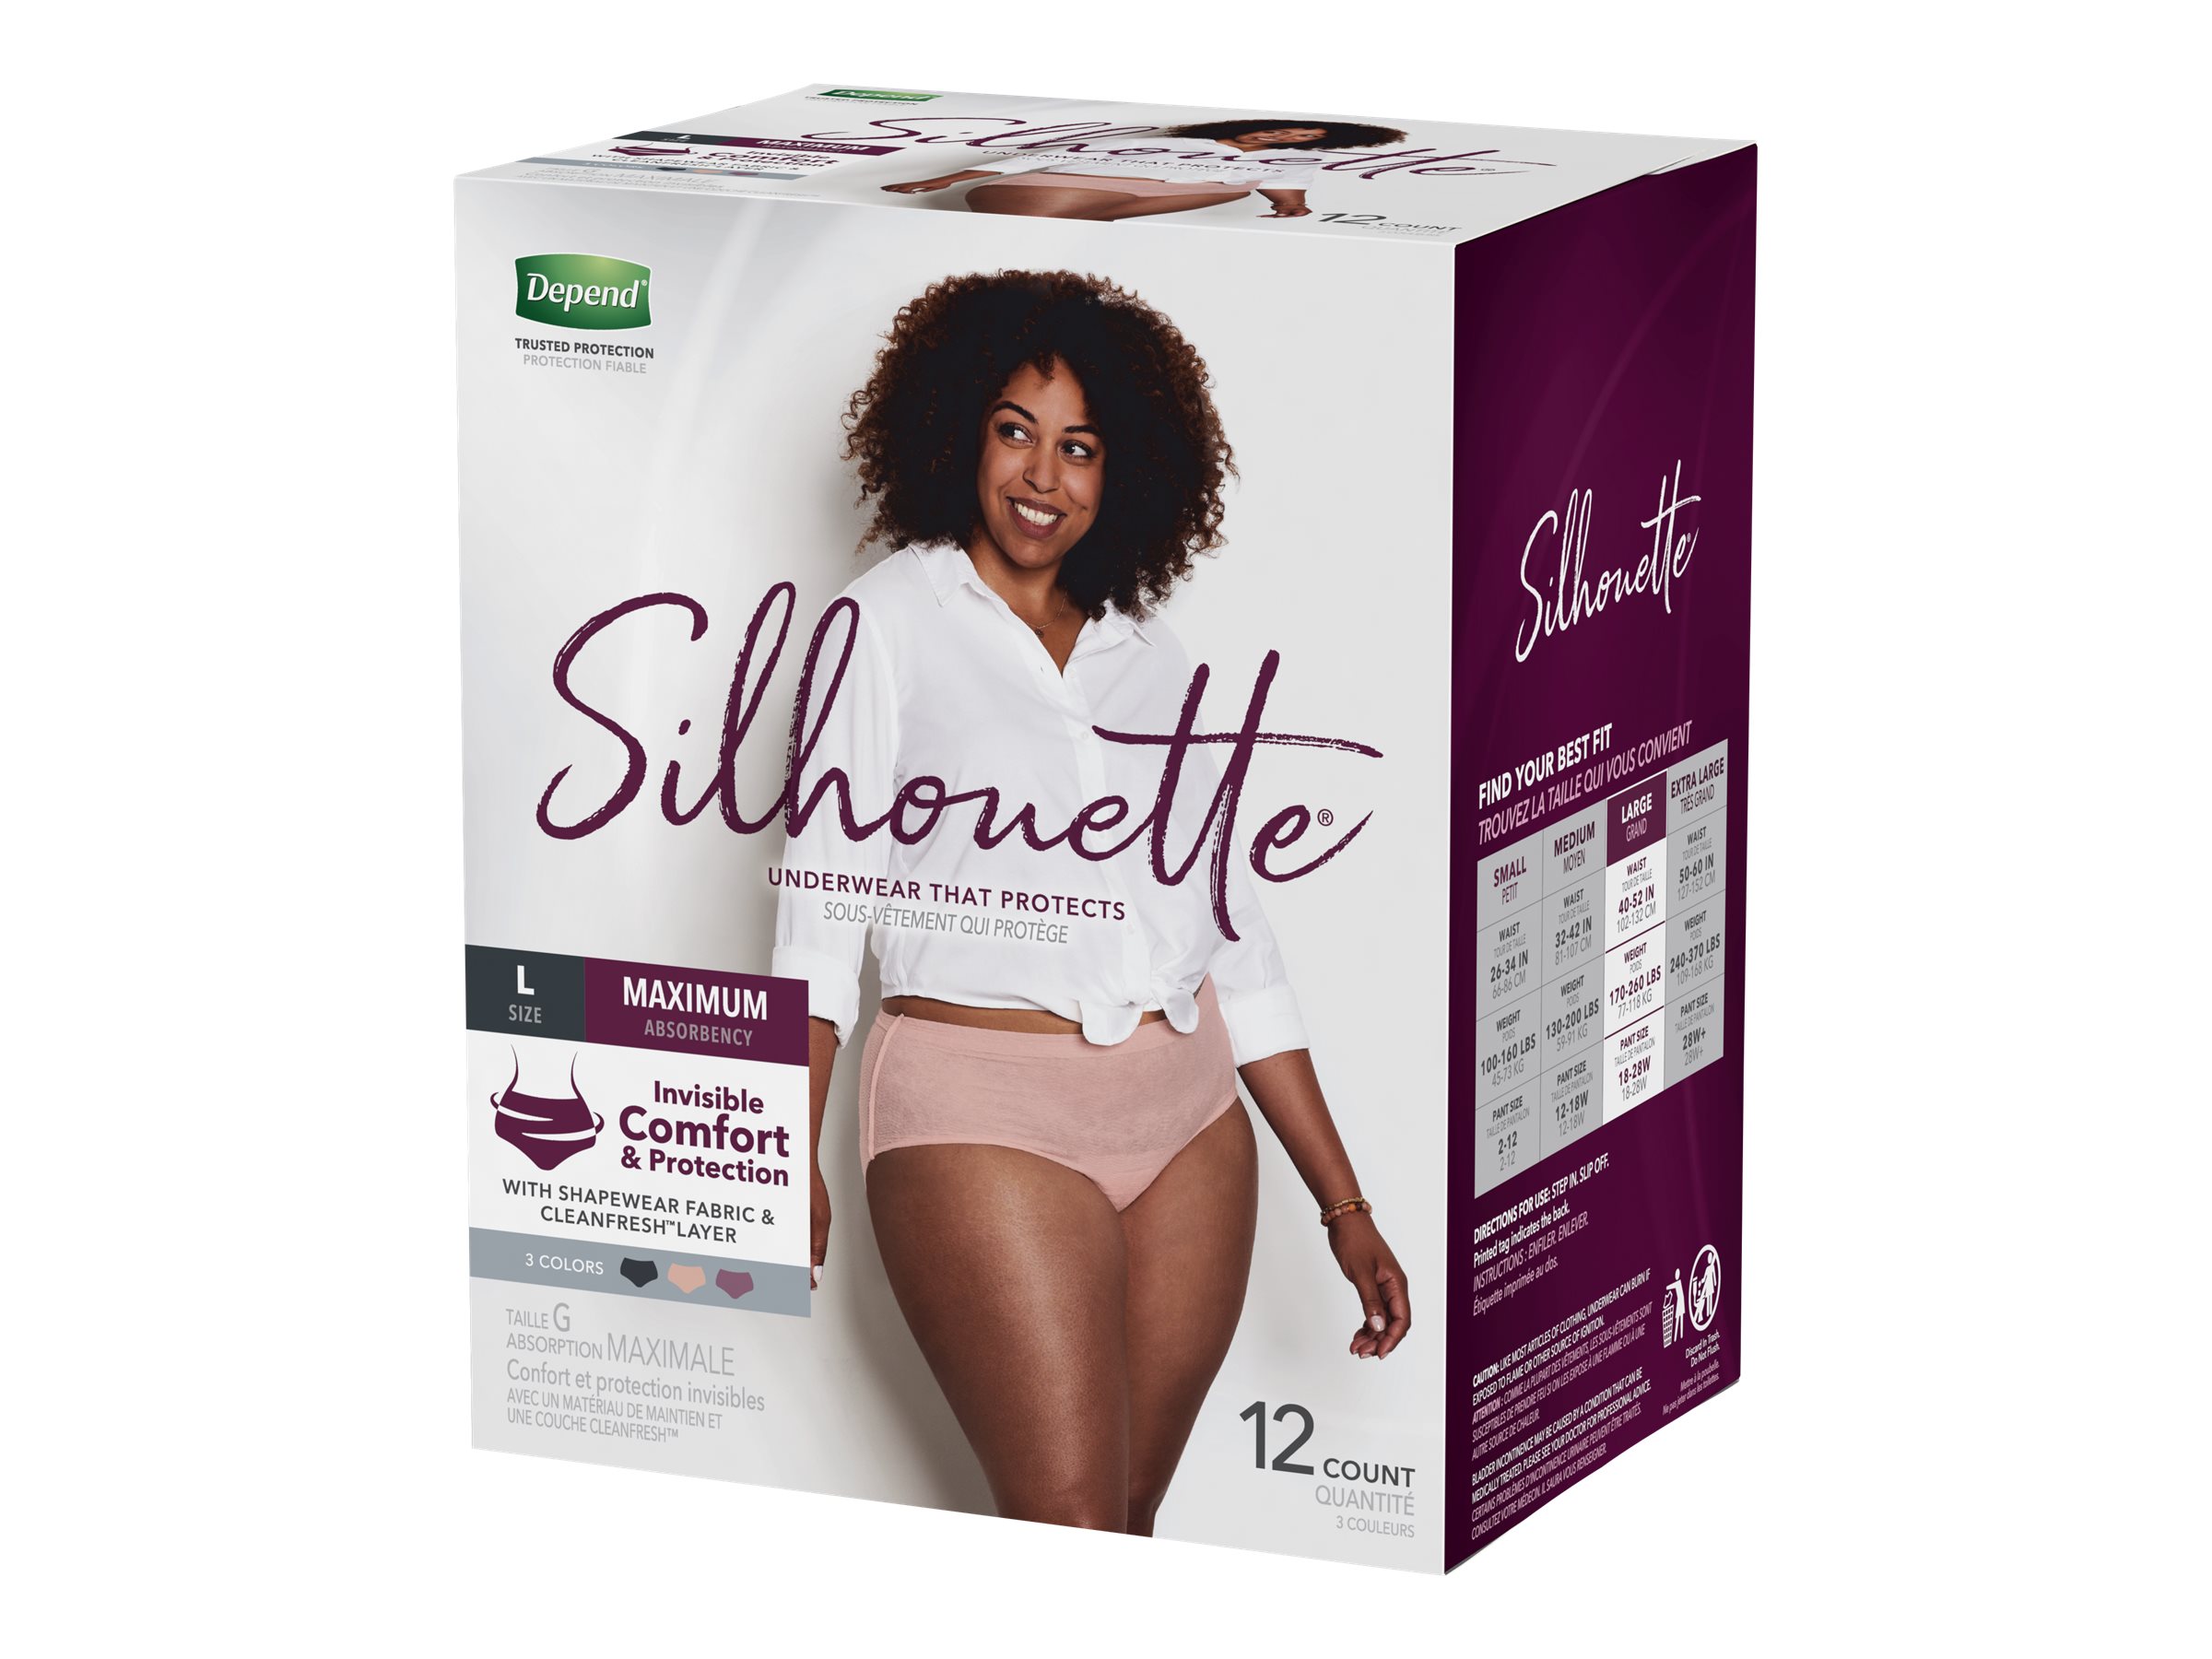 Depend Silhouette Adult Incontinence Underwear for Women - Pink/Black/Berry  - Maximum Absorbency - Large/12 Count